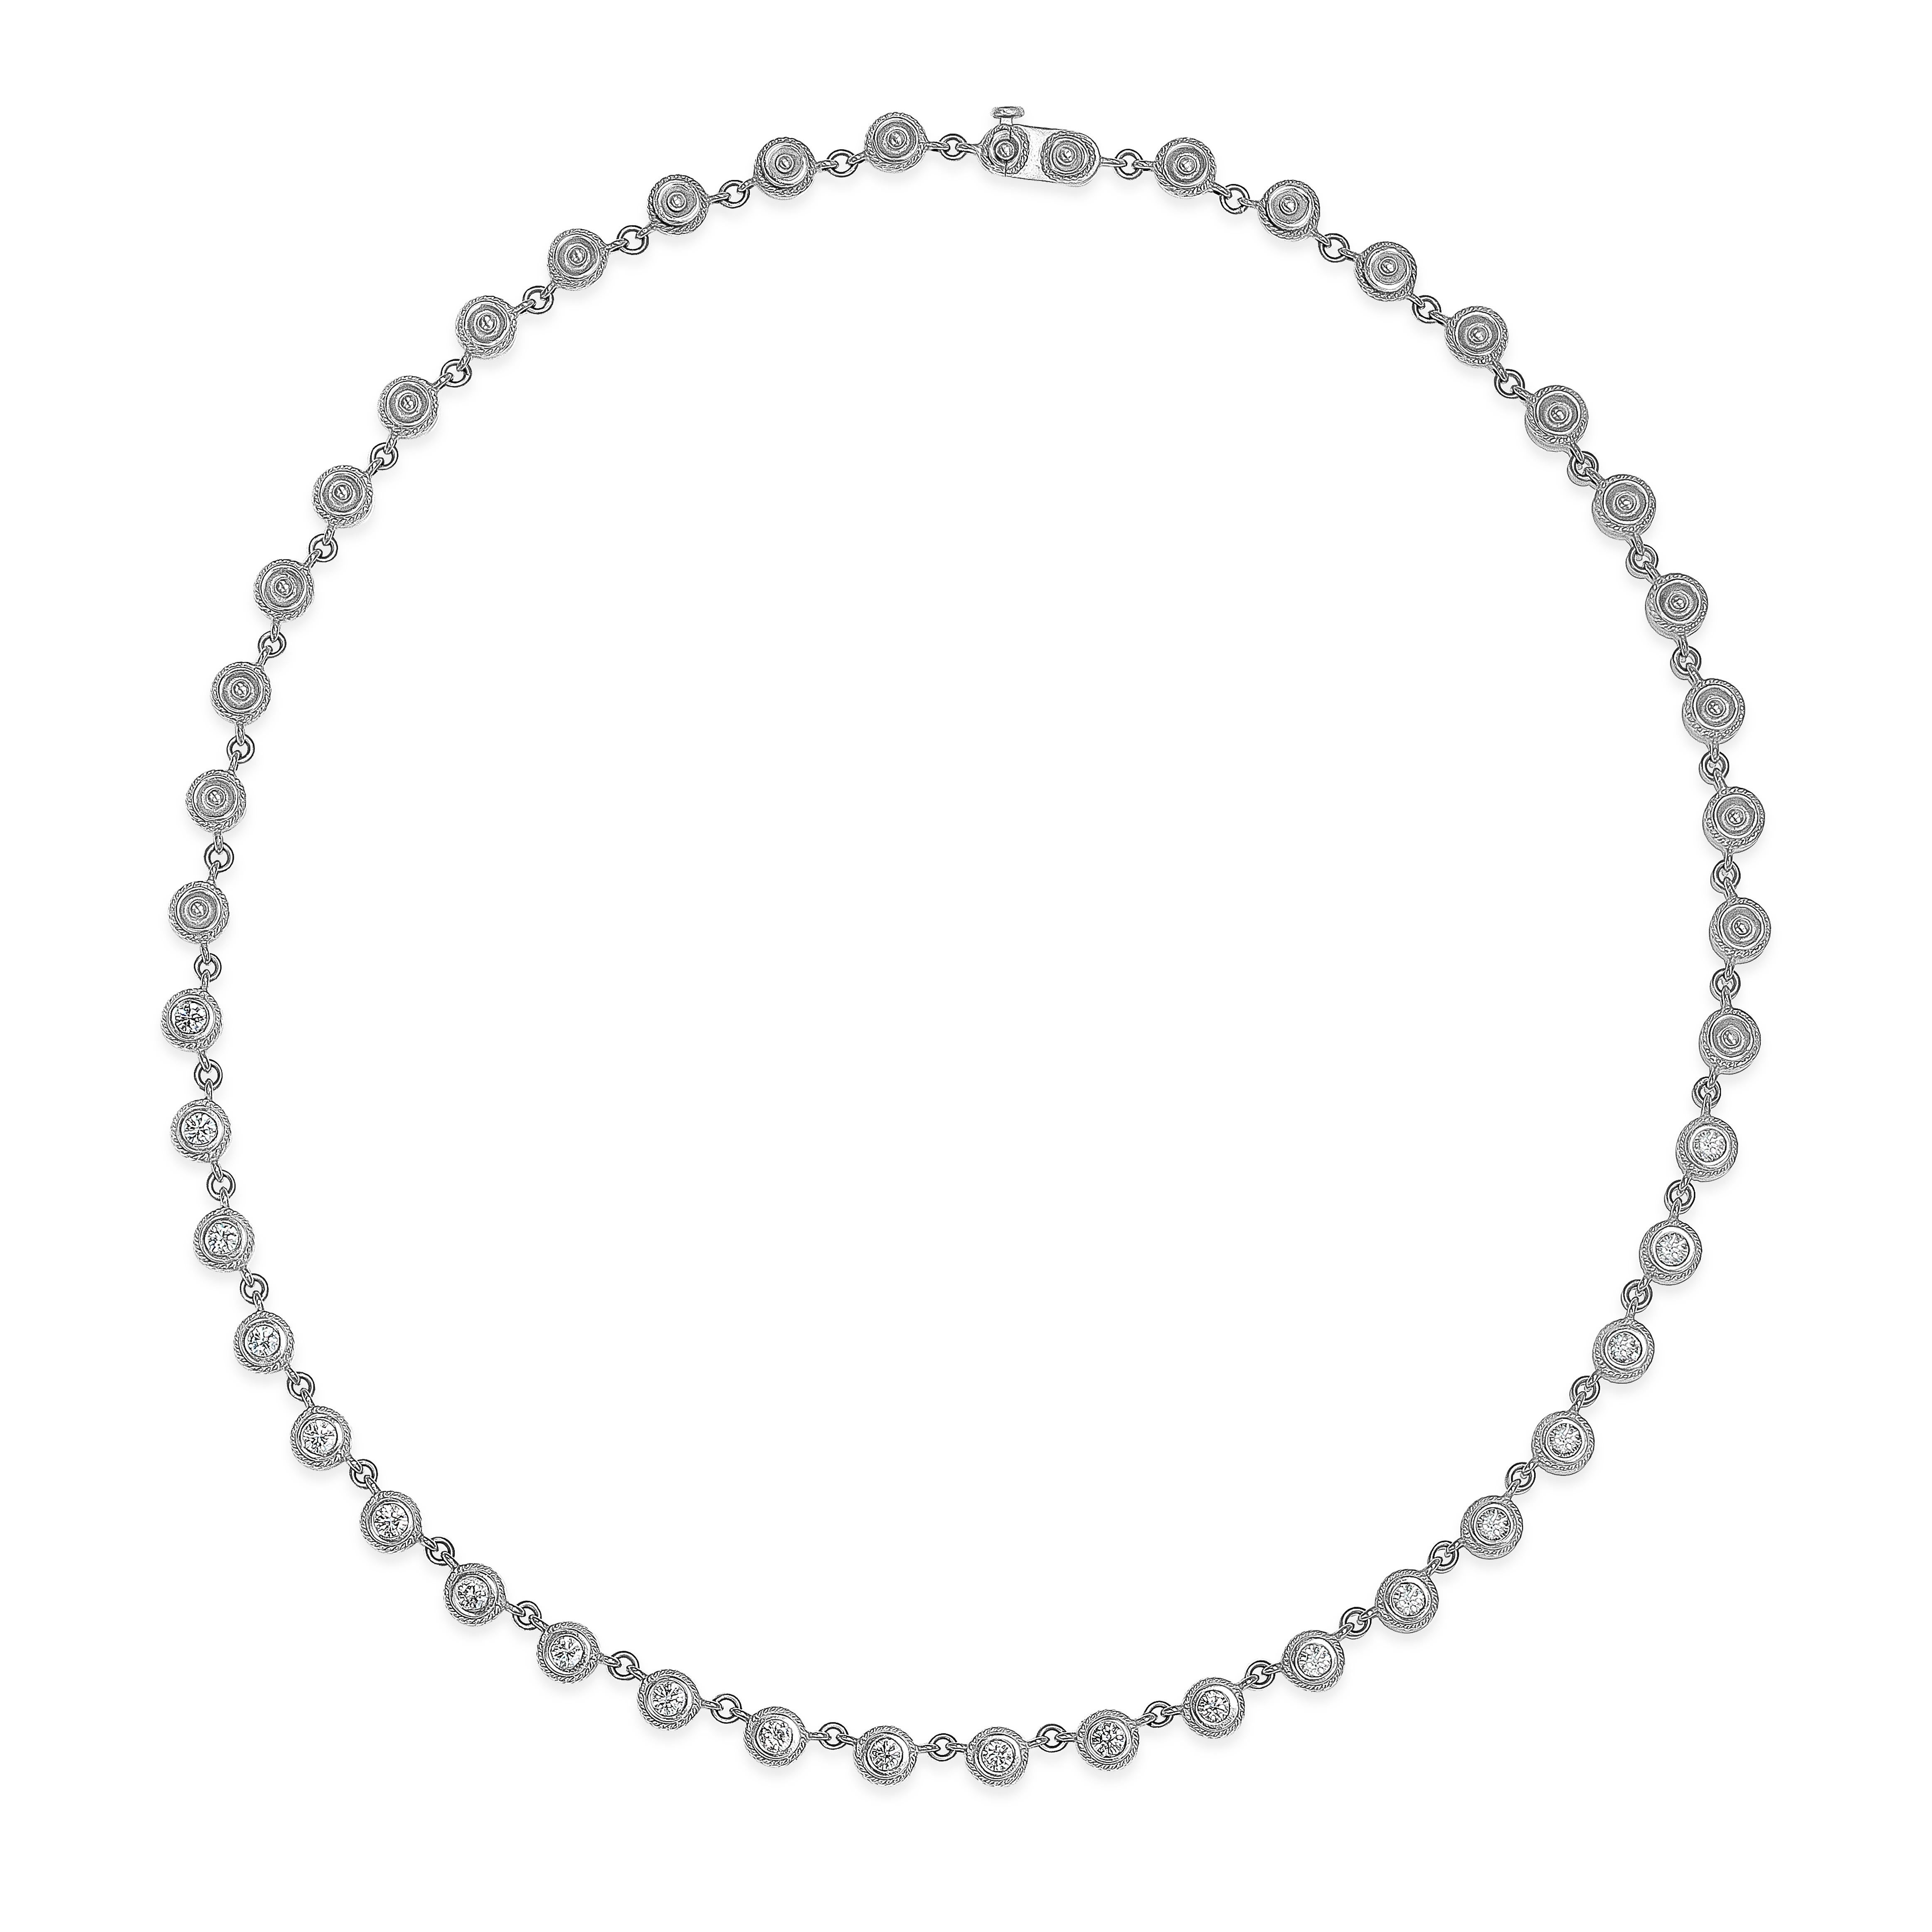 Contemporary Roman Malakov, 2.03 Carat Round Diamonds by the Yard Necklace For Sale